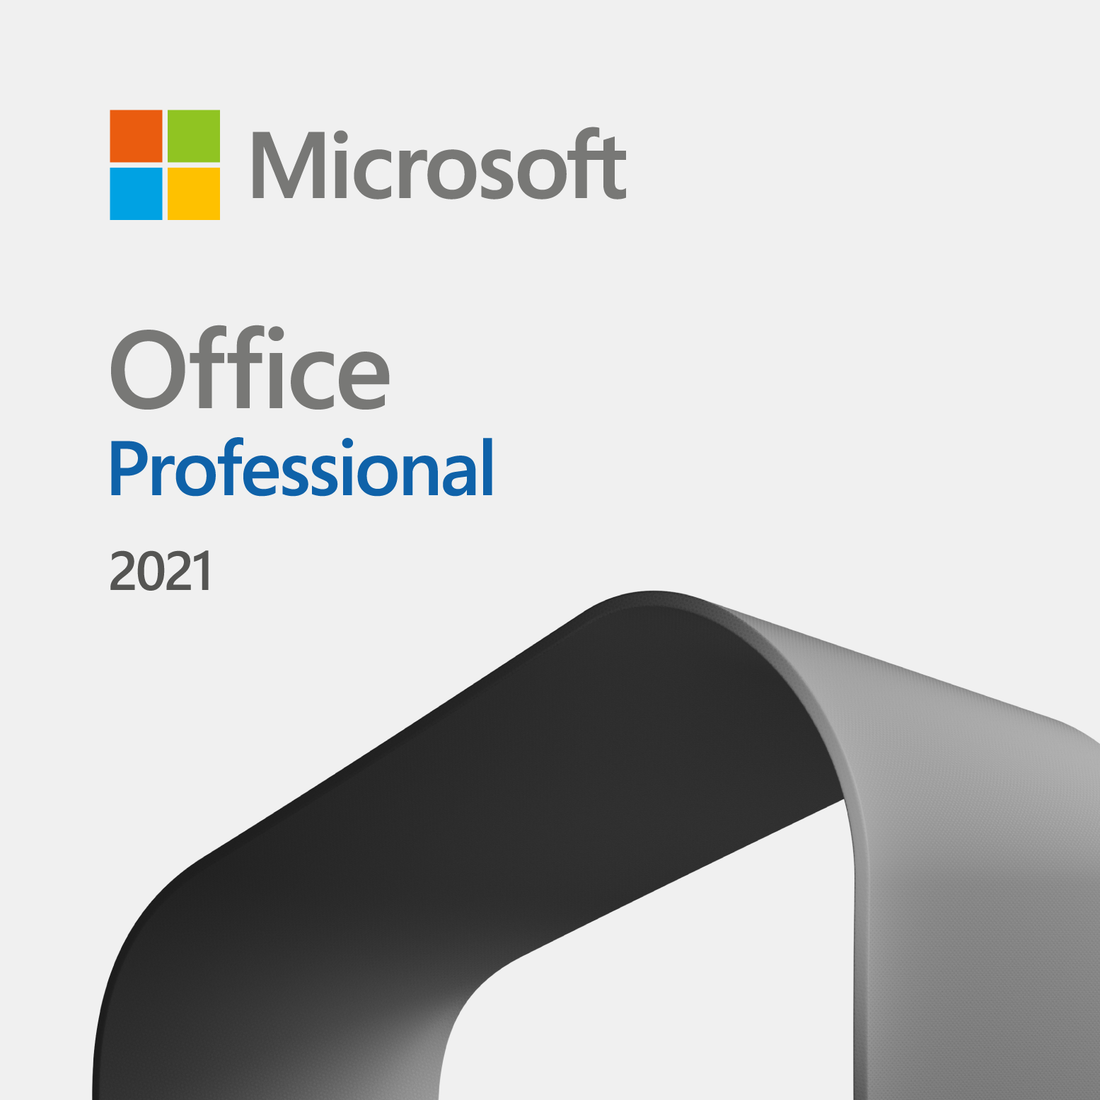 MICROSOFT OFFICE PROFESSIONAL PLUS 2021: A COMPREHENSIVE GUIDE FOR BEGINNERS.